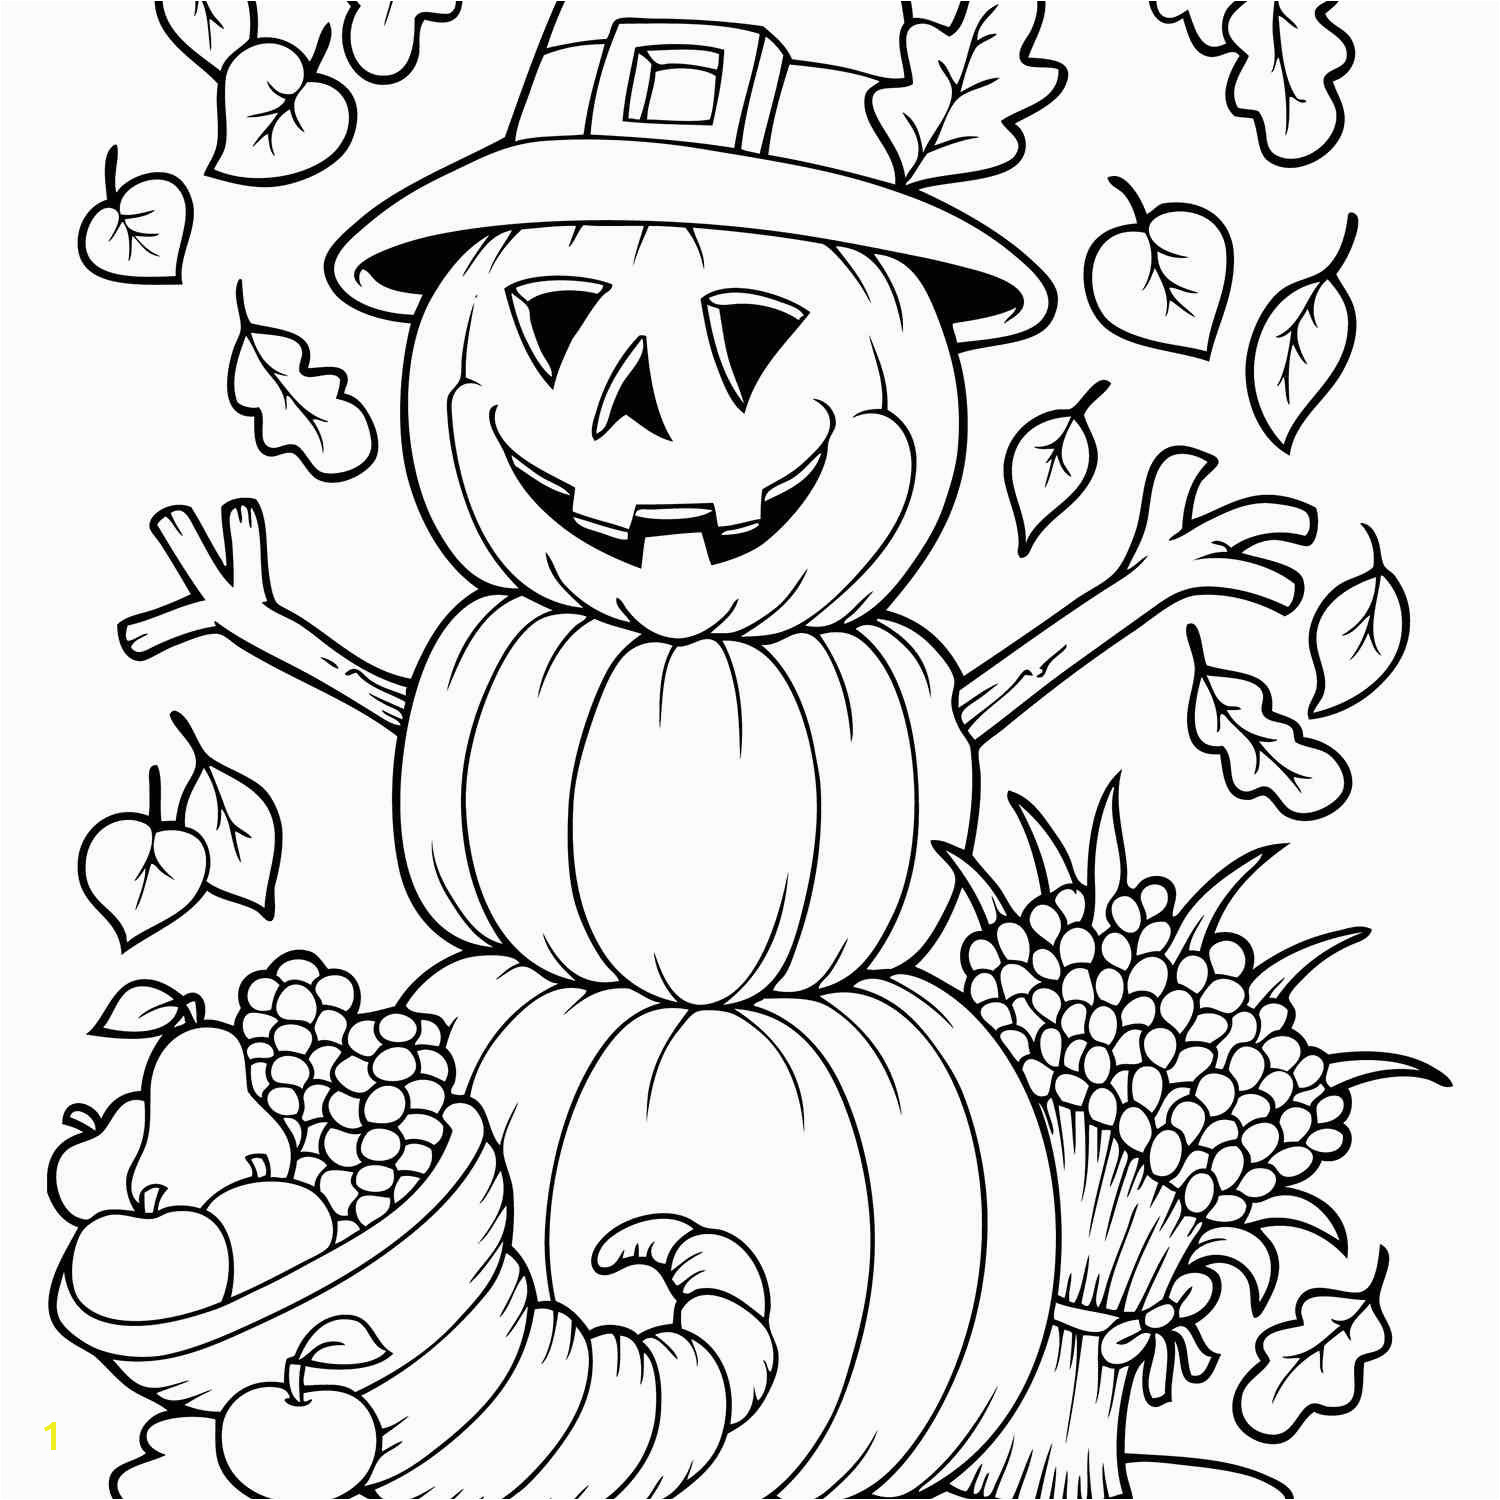 Cornucopia Basket Coloring Page Free Autumn and Fall Coloring Pages